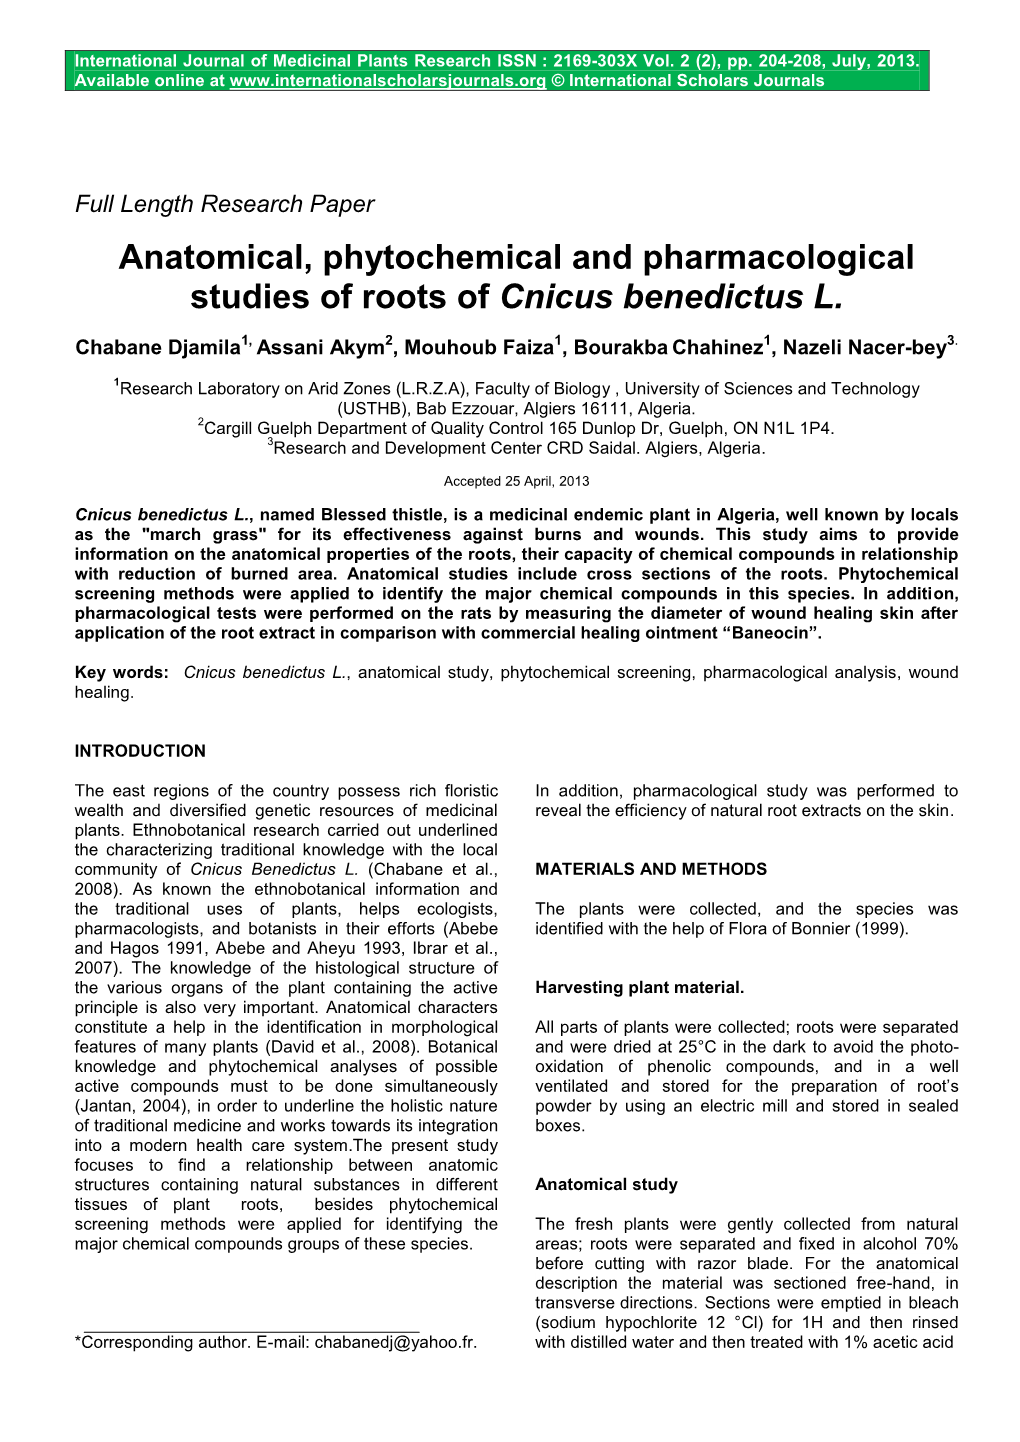 Anatomical, Phytochemical and Pharmacological Studies of Roots of Cnicus Benedictus L